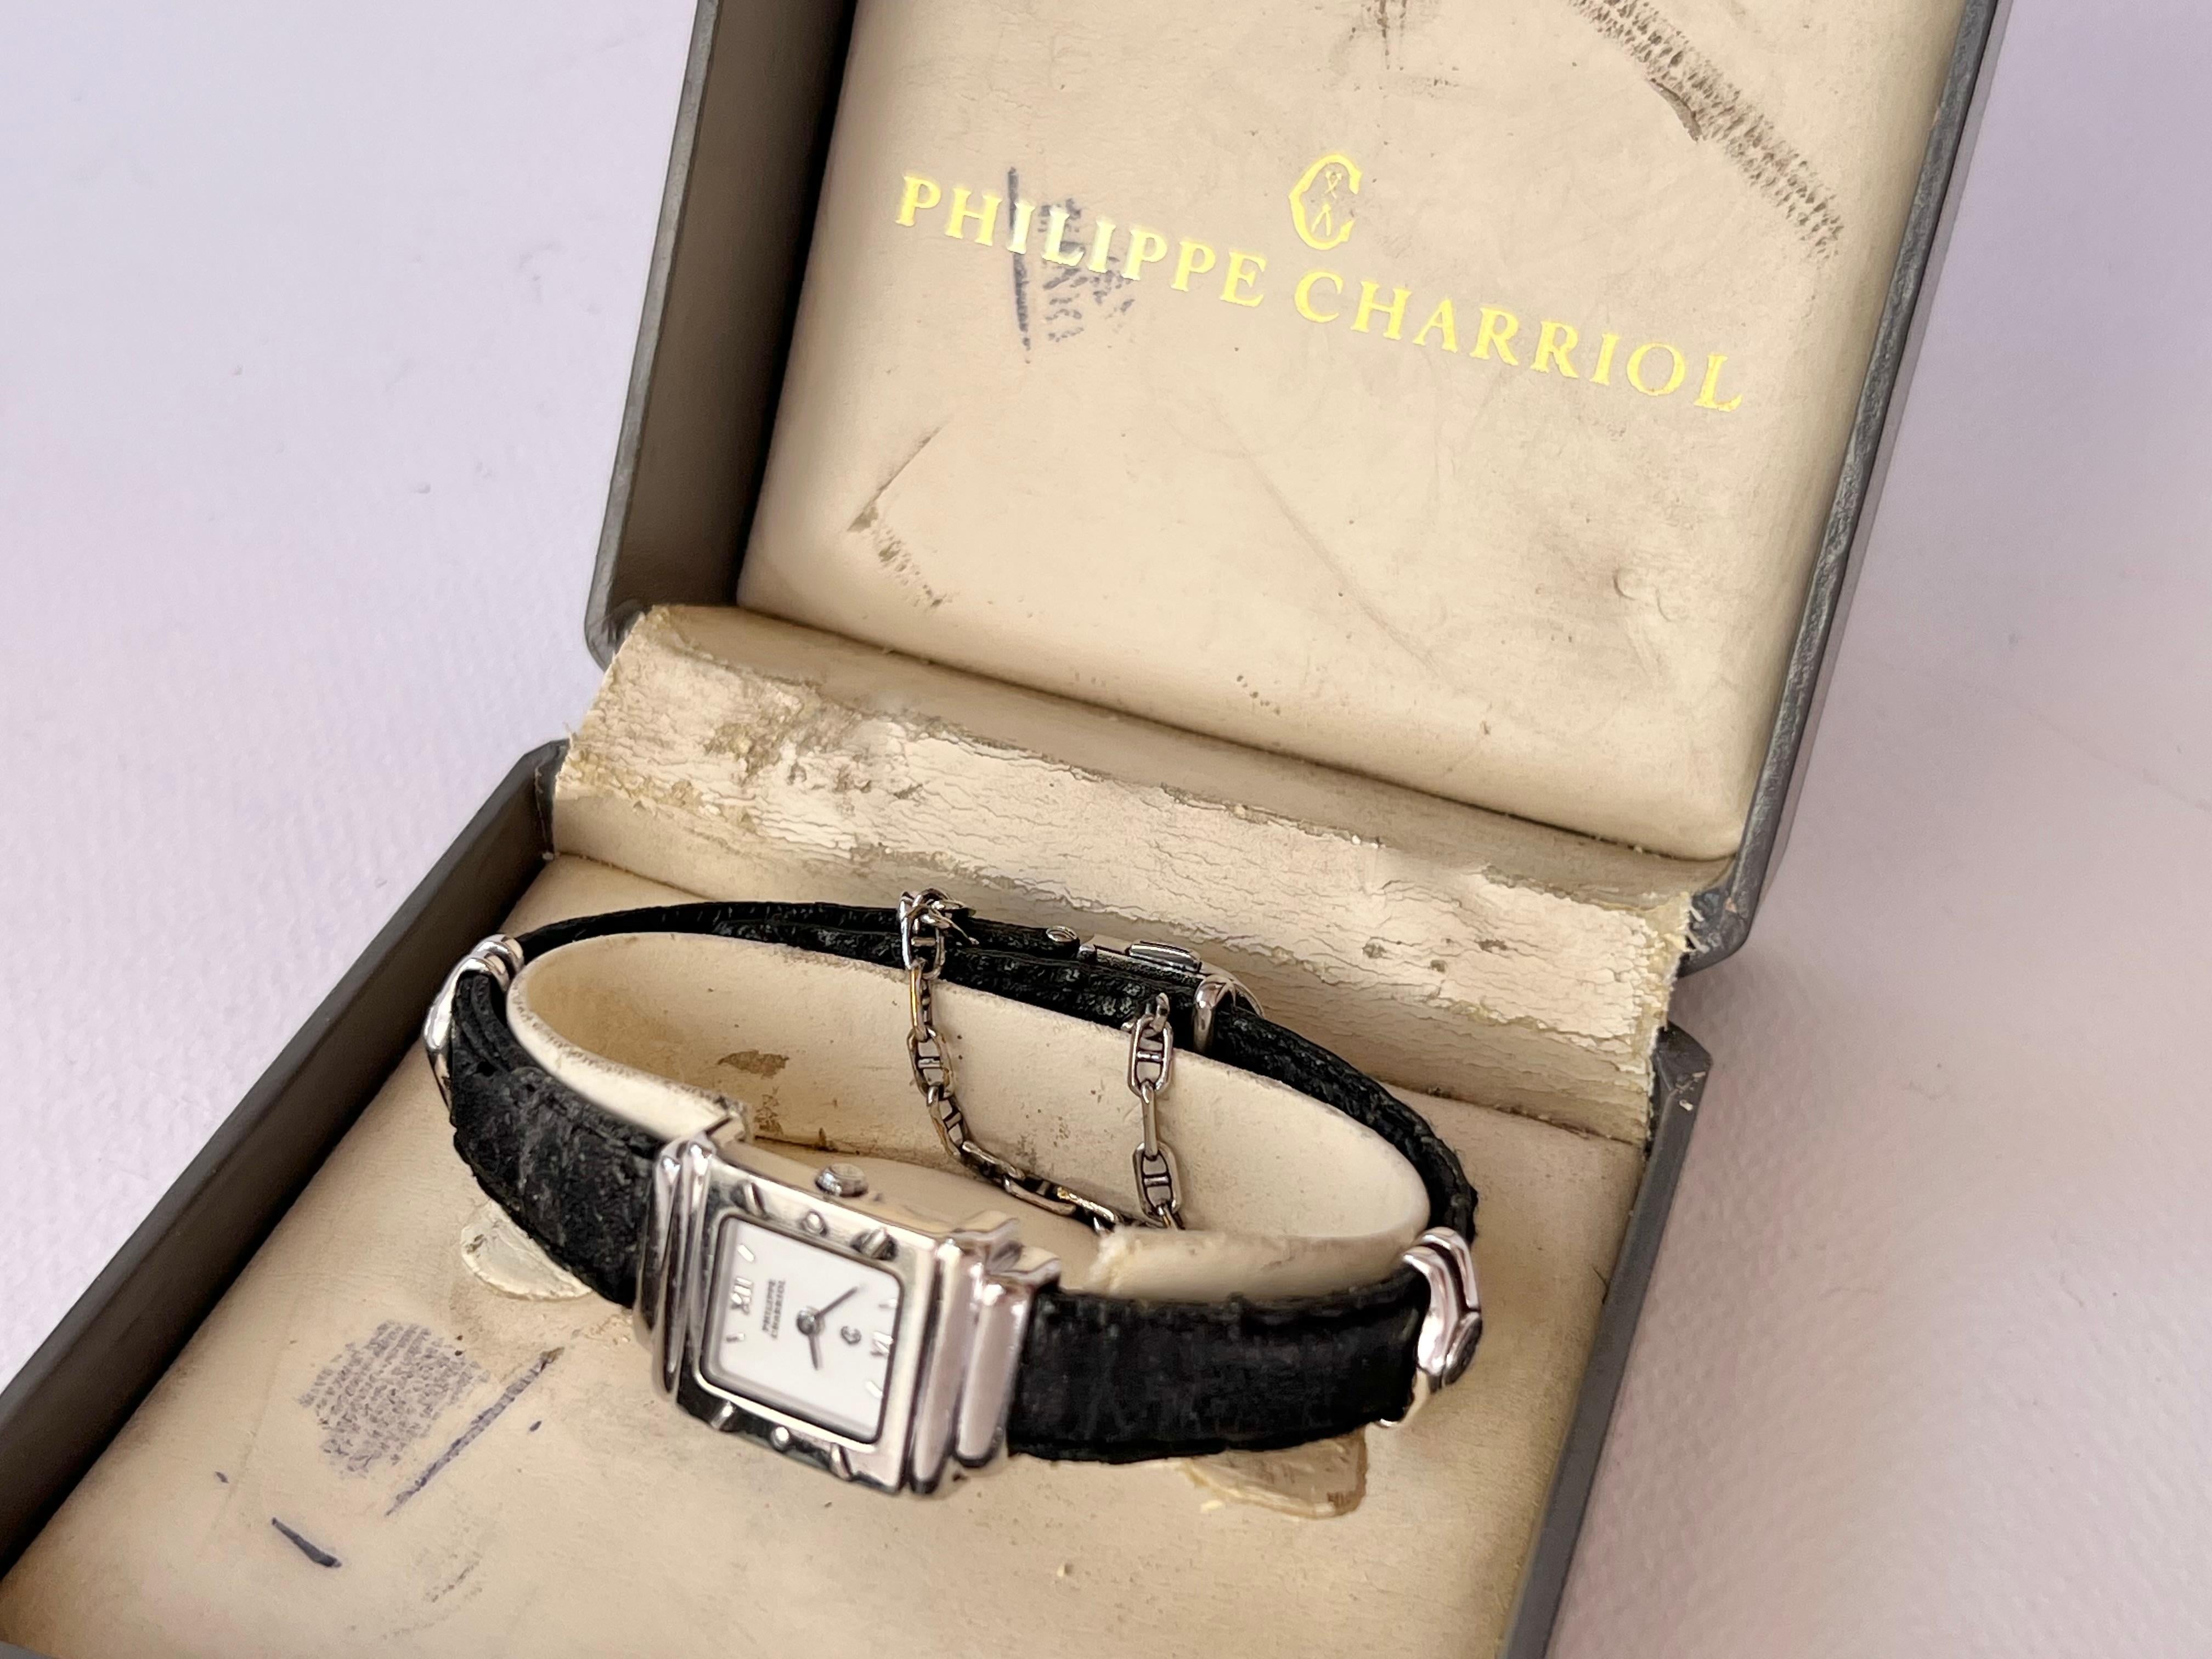 philippe charriol vintage watches